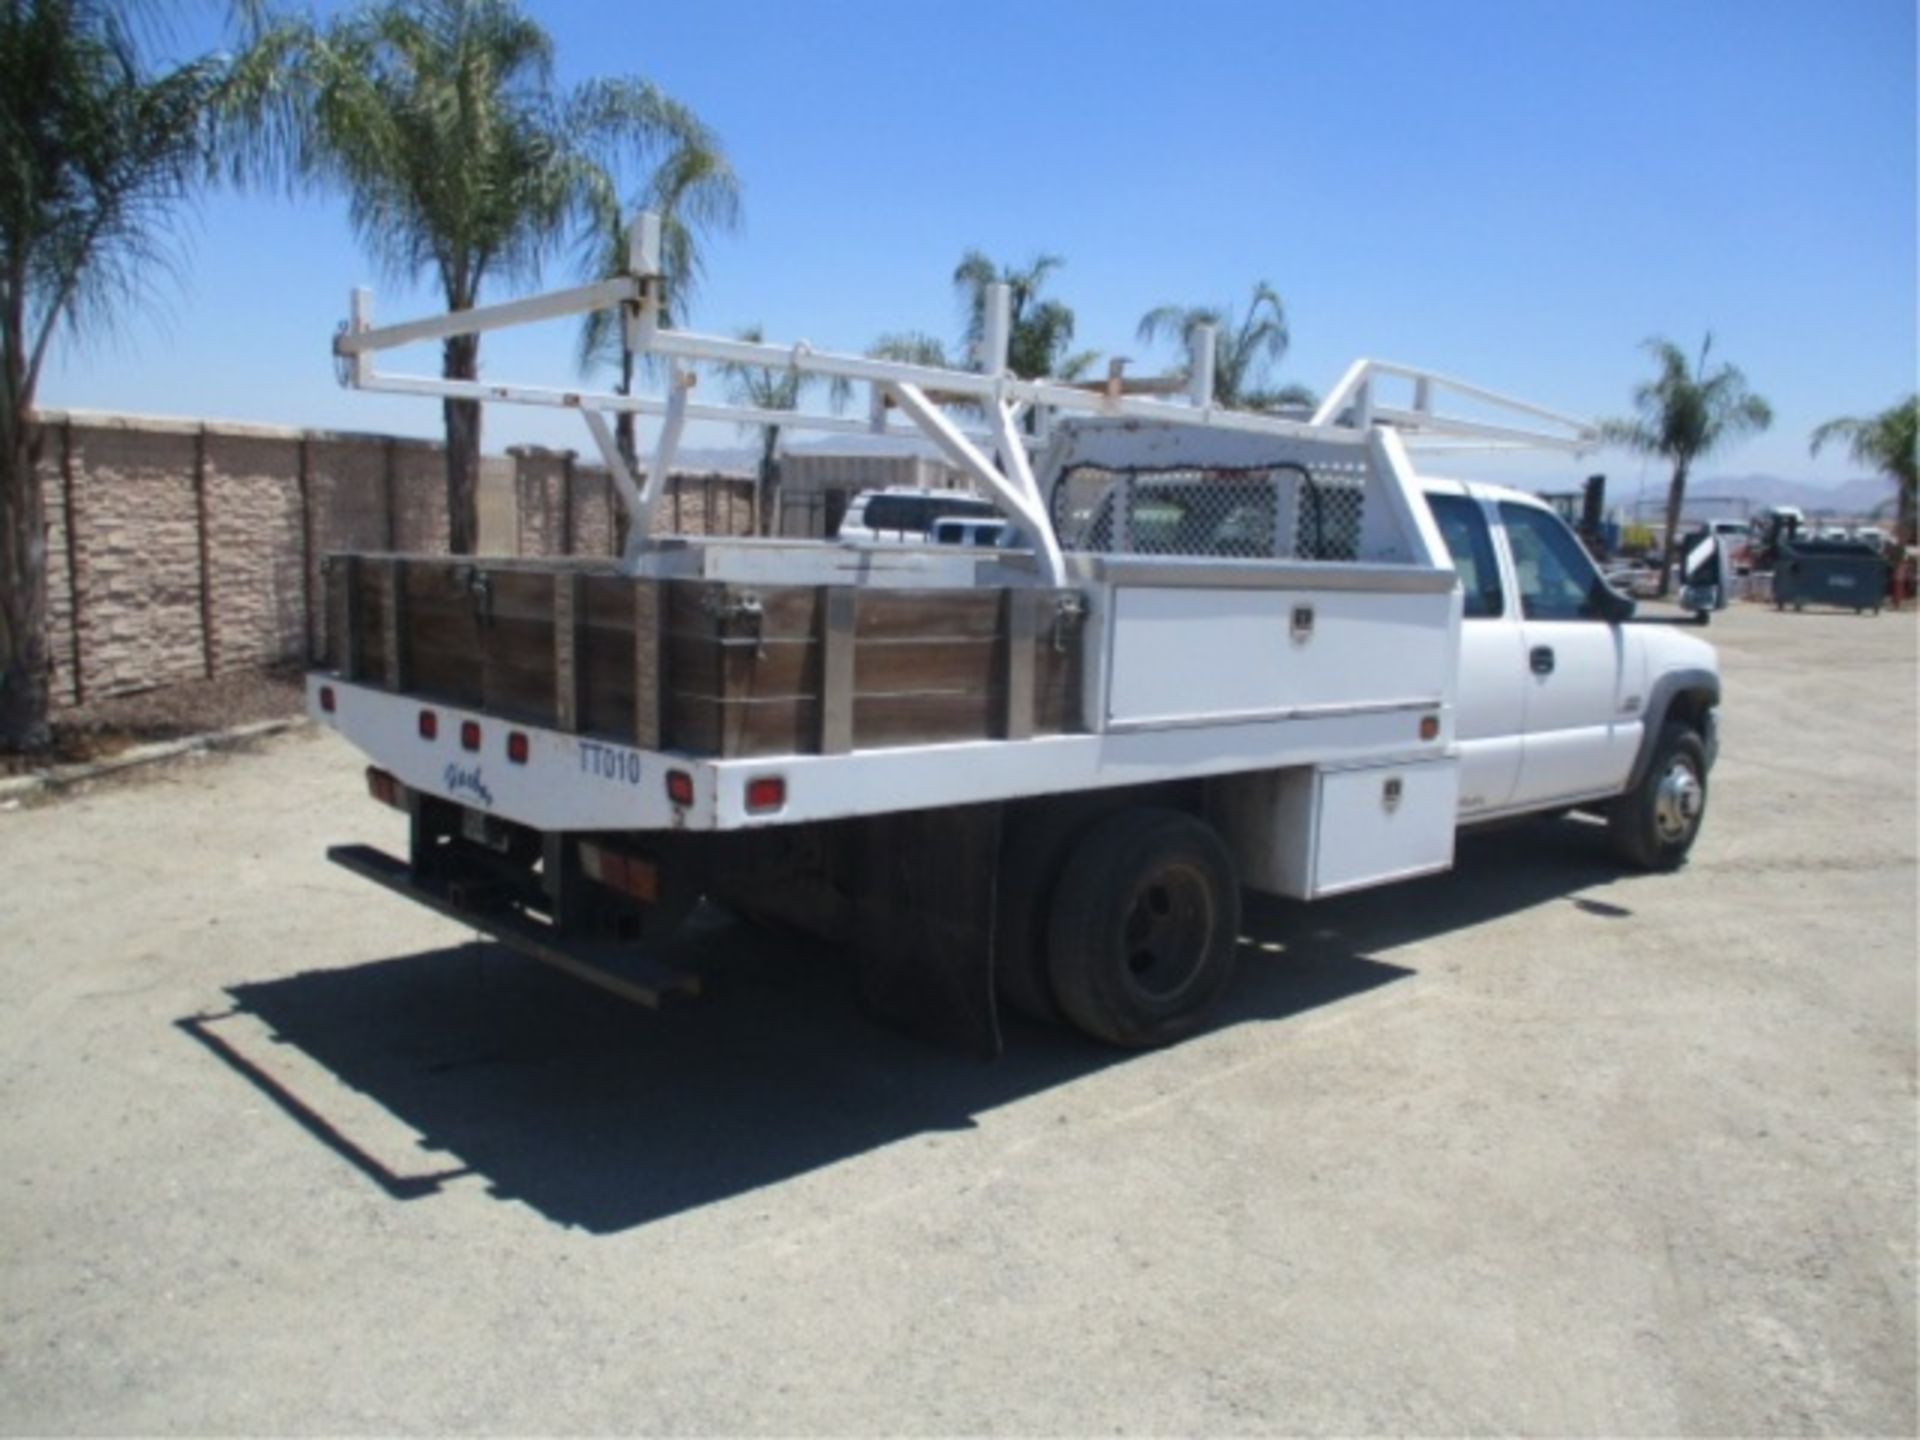 2006 Chevrolet 3500 Extended-Cab Utility Truck, 6.6L Turbo Diesel, Automatic, Tool Boxes, Lumber - Image 15 of 71